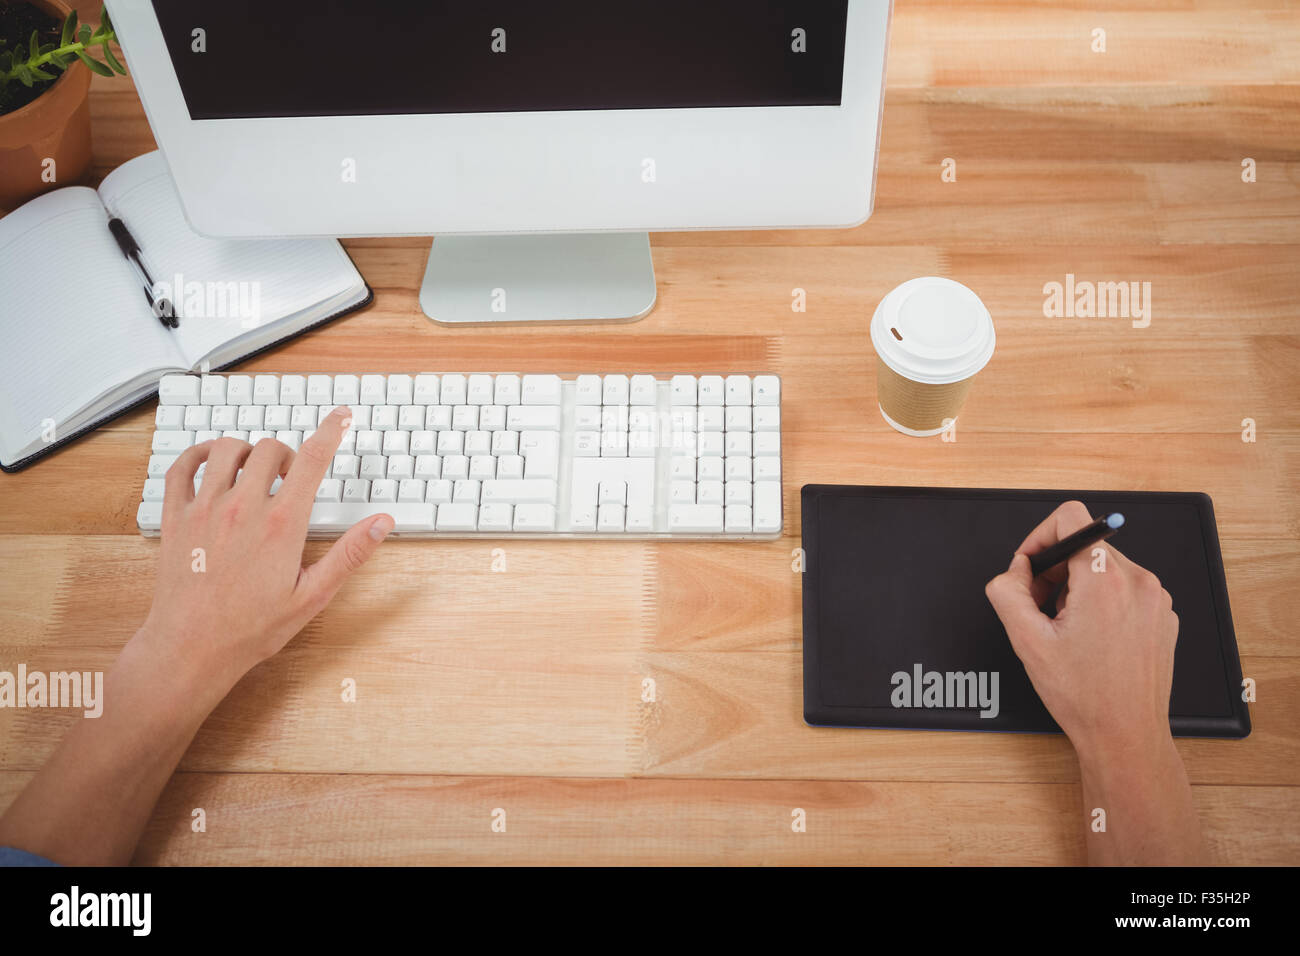 Man using graphics tablet while typing on keyboard Stock Photo